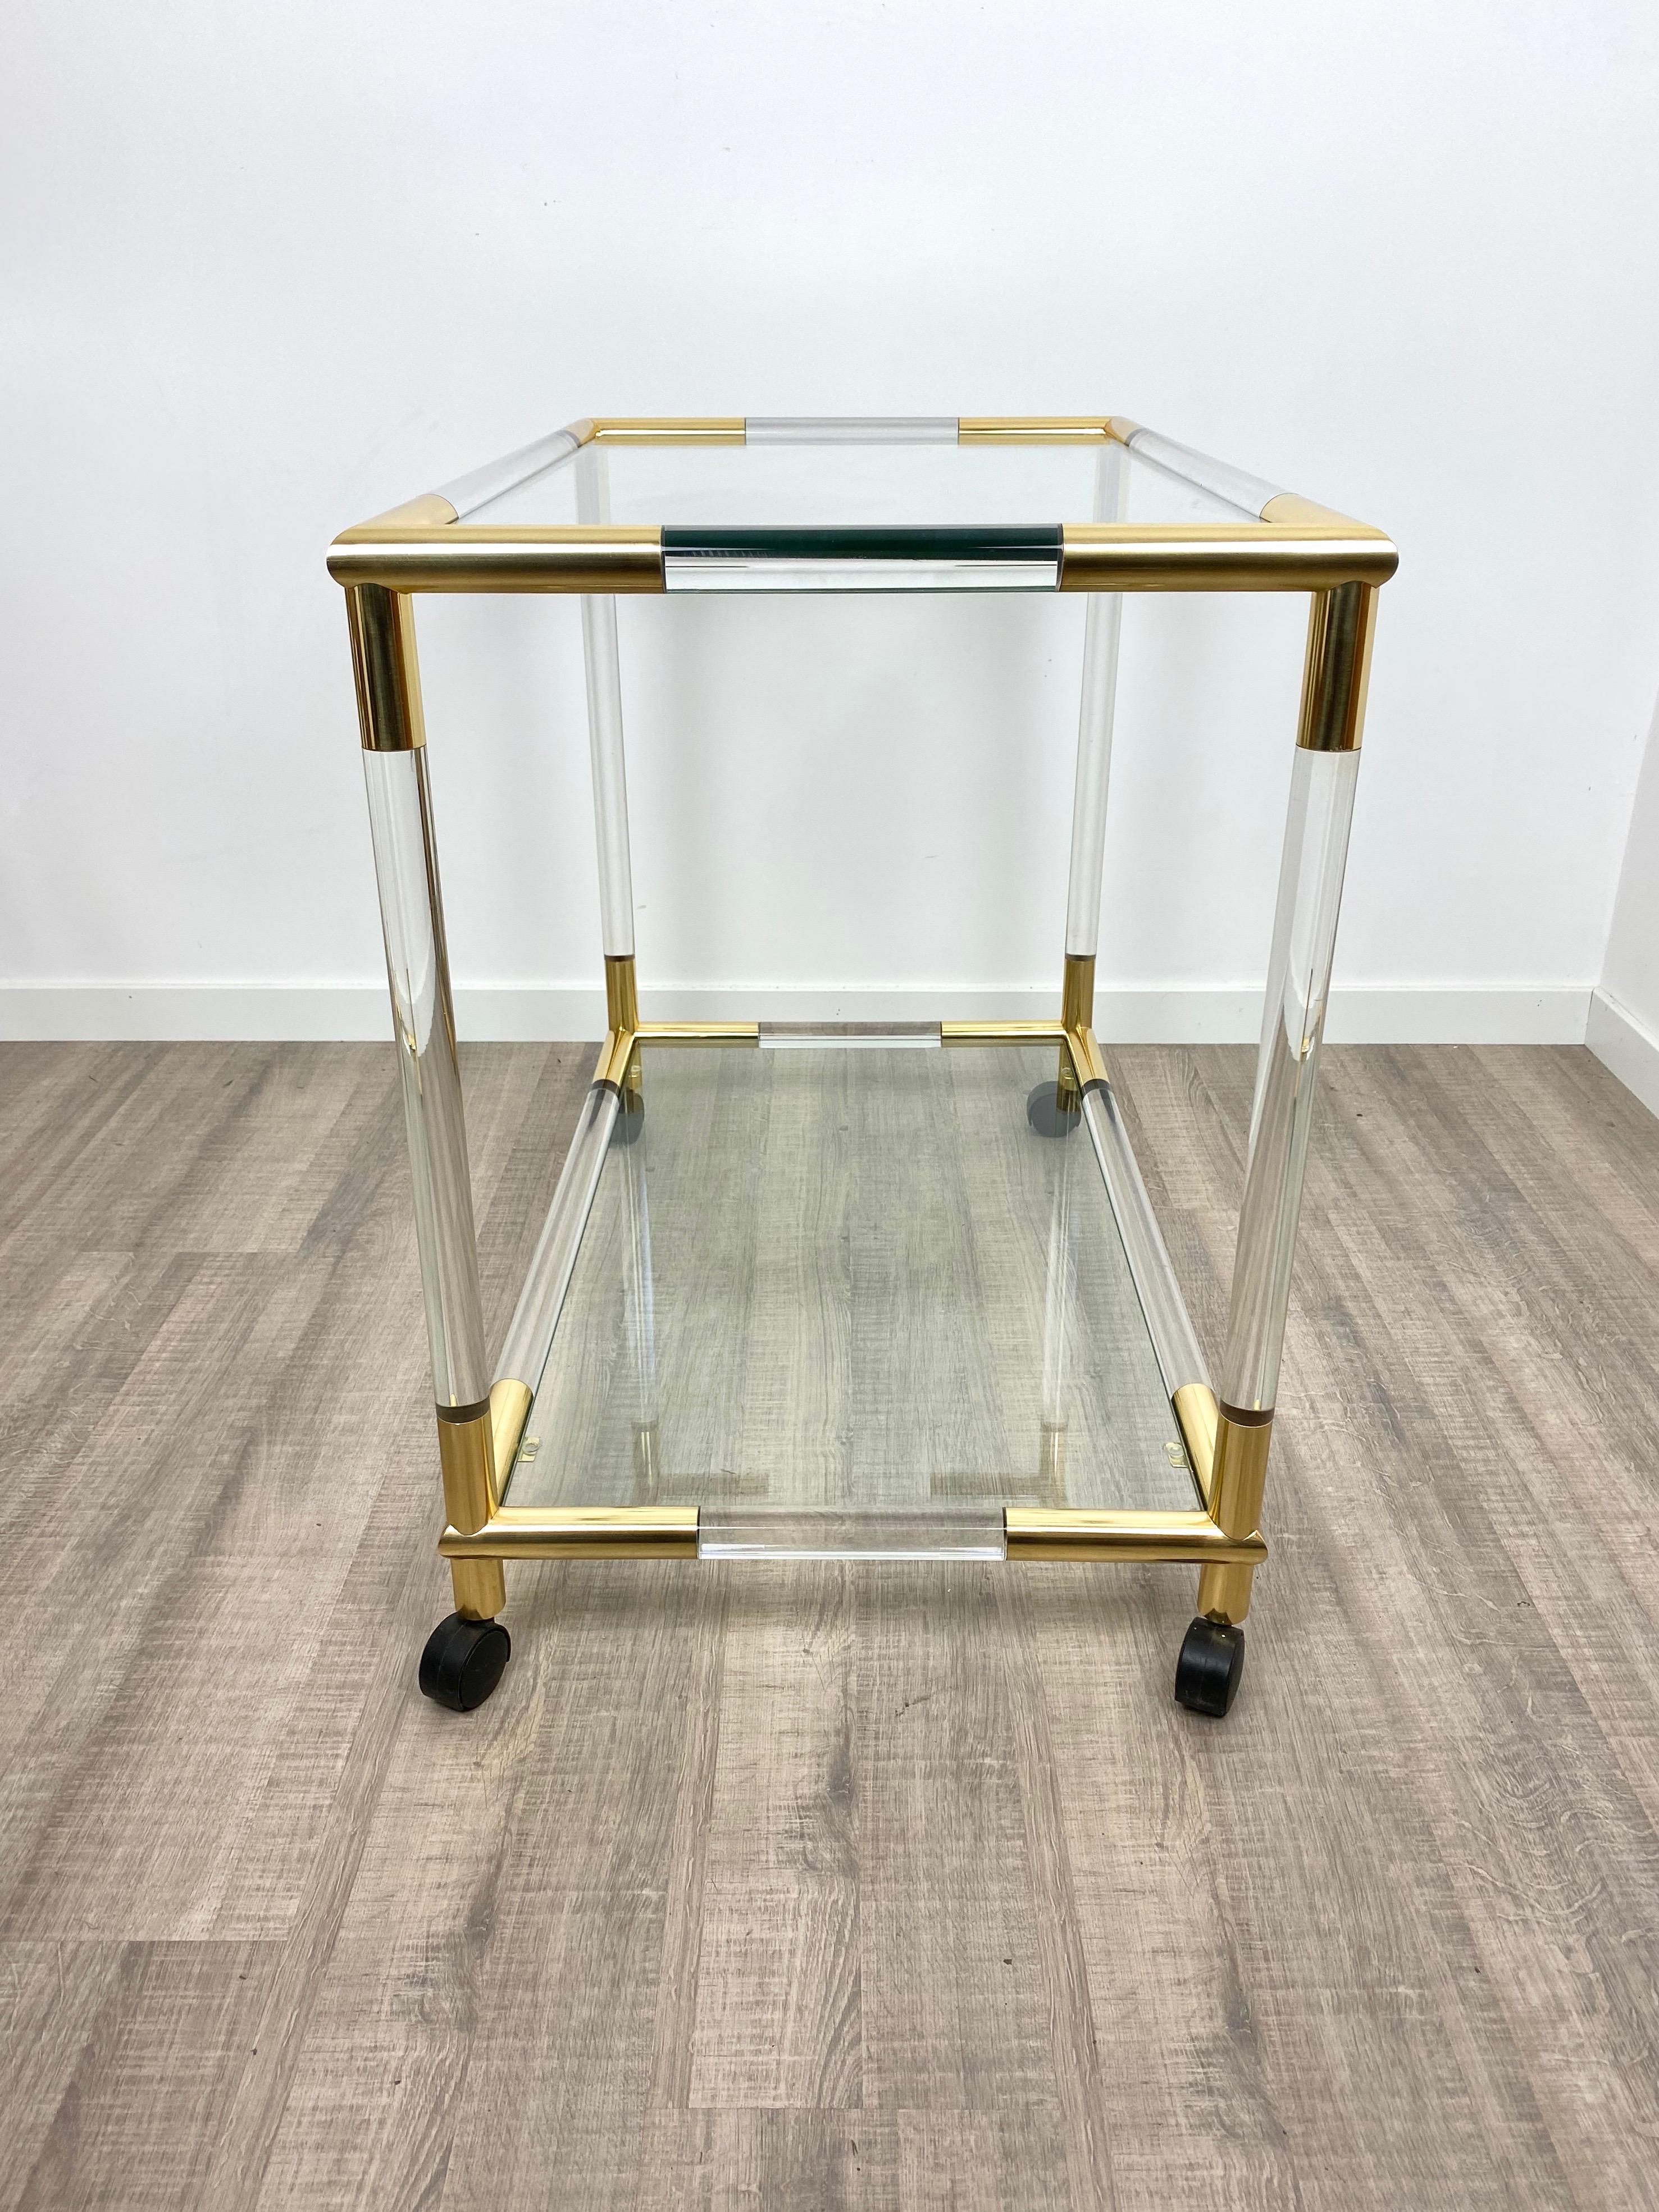 Lucite, Brass and Glass Bar Serving Cart Trolley, Italy, 1970s For Sale 2